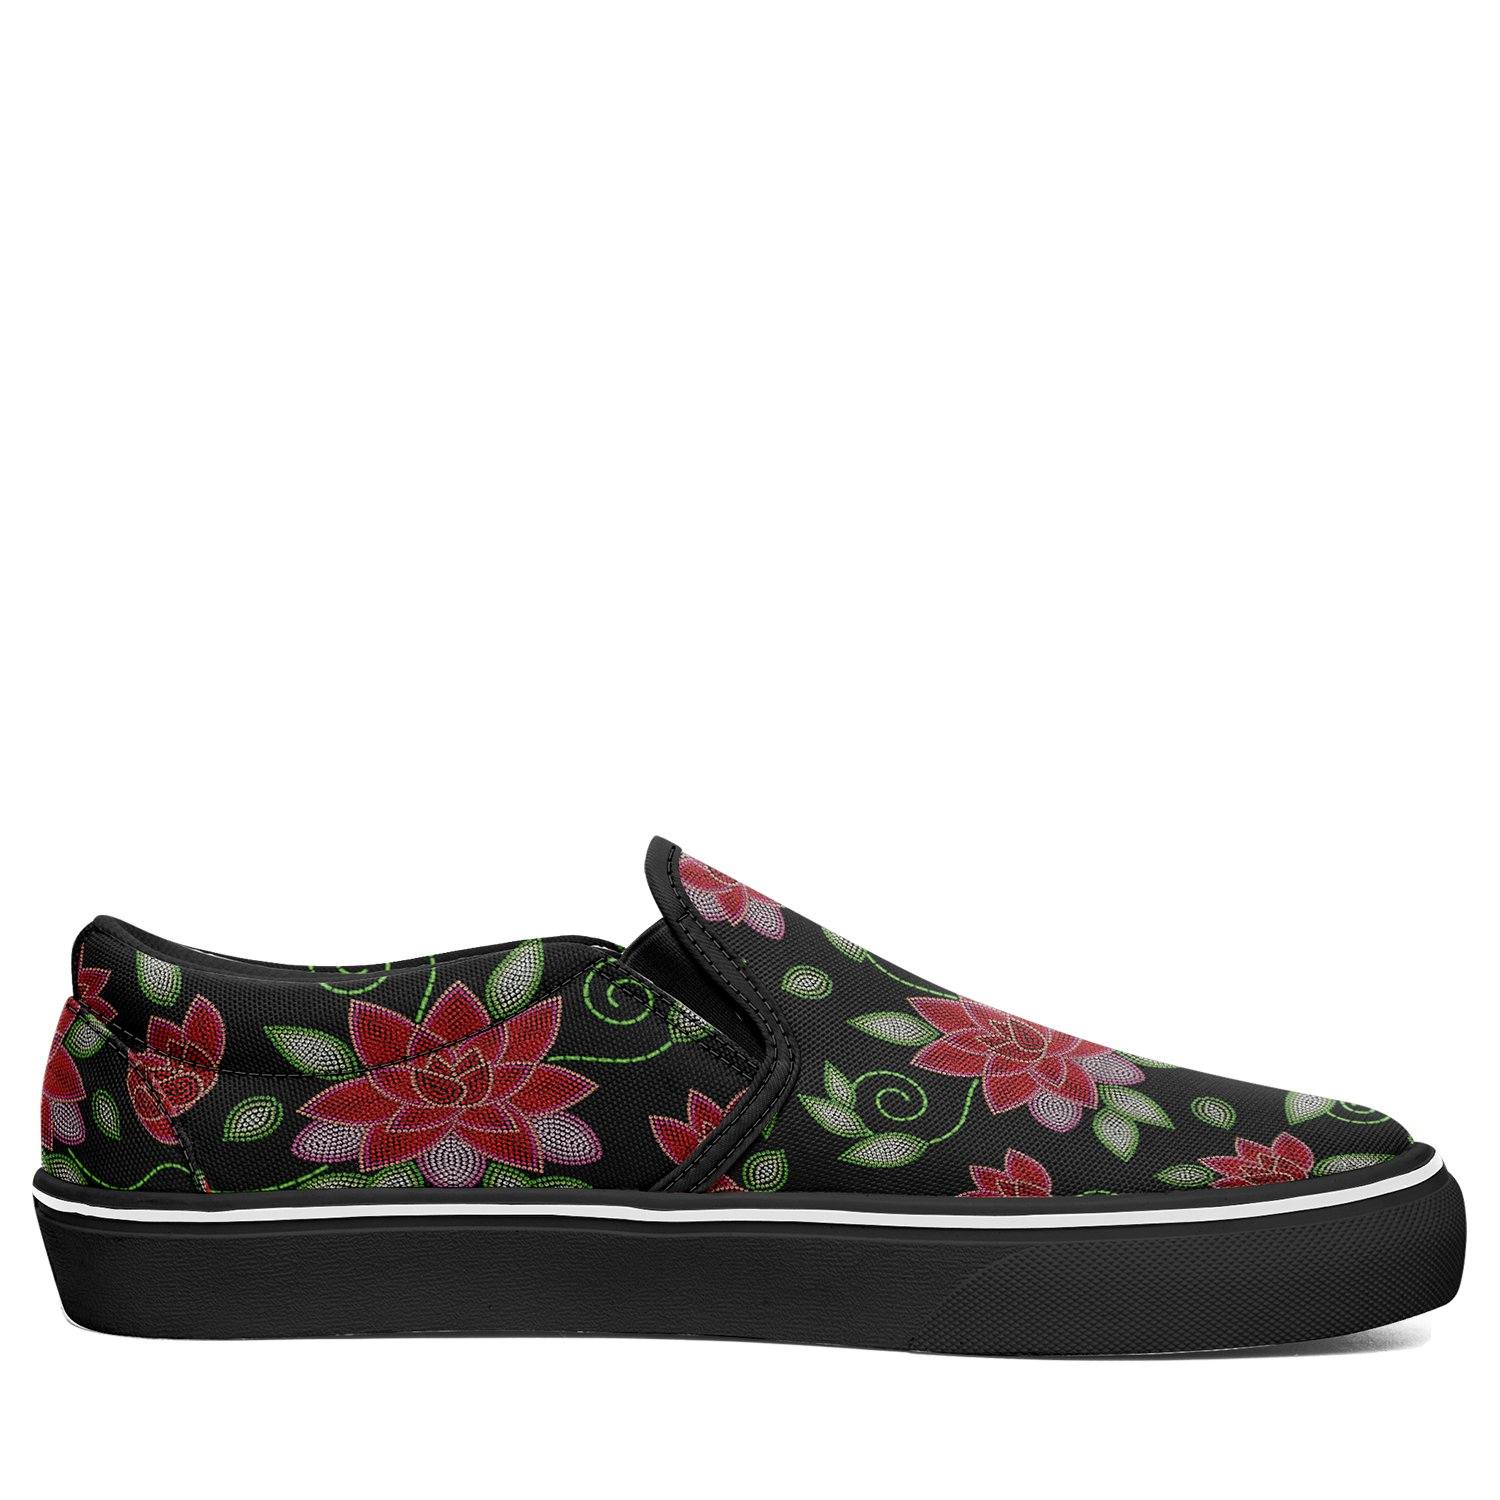 Red Beaded Rose Otoyimm Kid's Canvas Slip On Shoes otoyimm Herman 